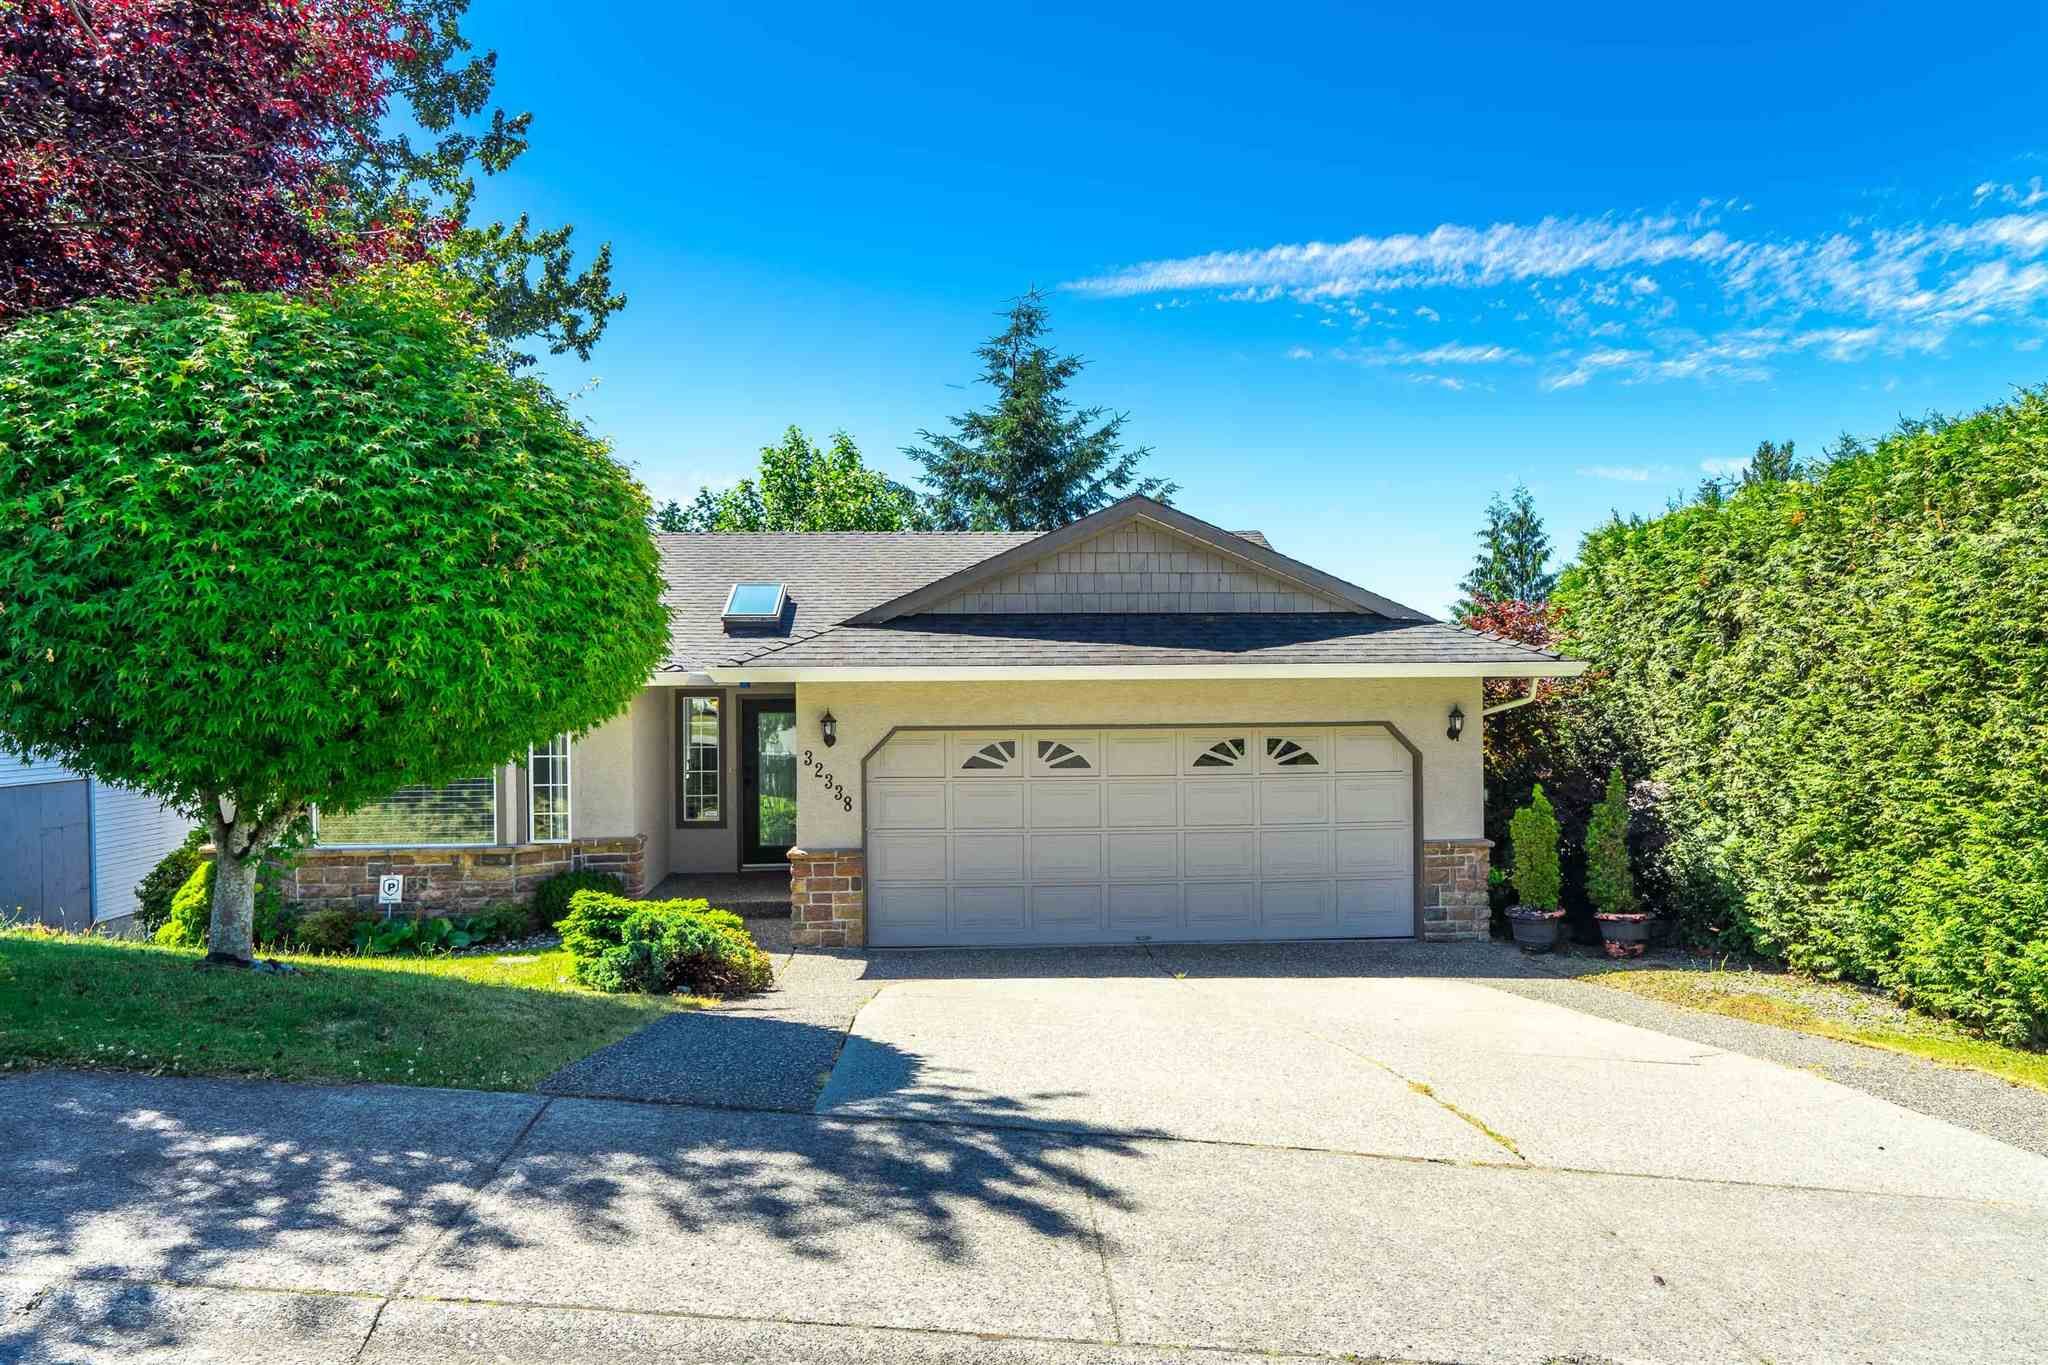 Main Photo: 32338 W BOBCAT Drive in Mission: Mission BC House for sale : MLS®# R2593548